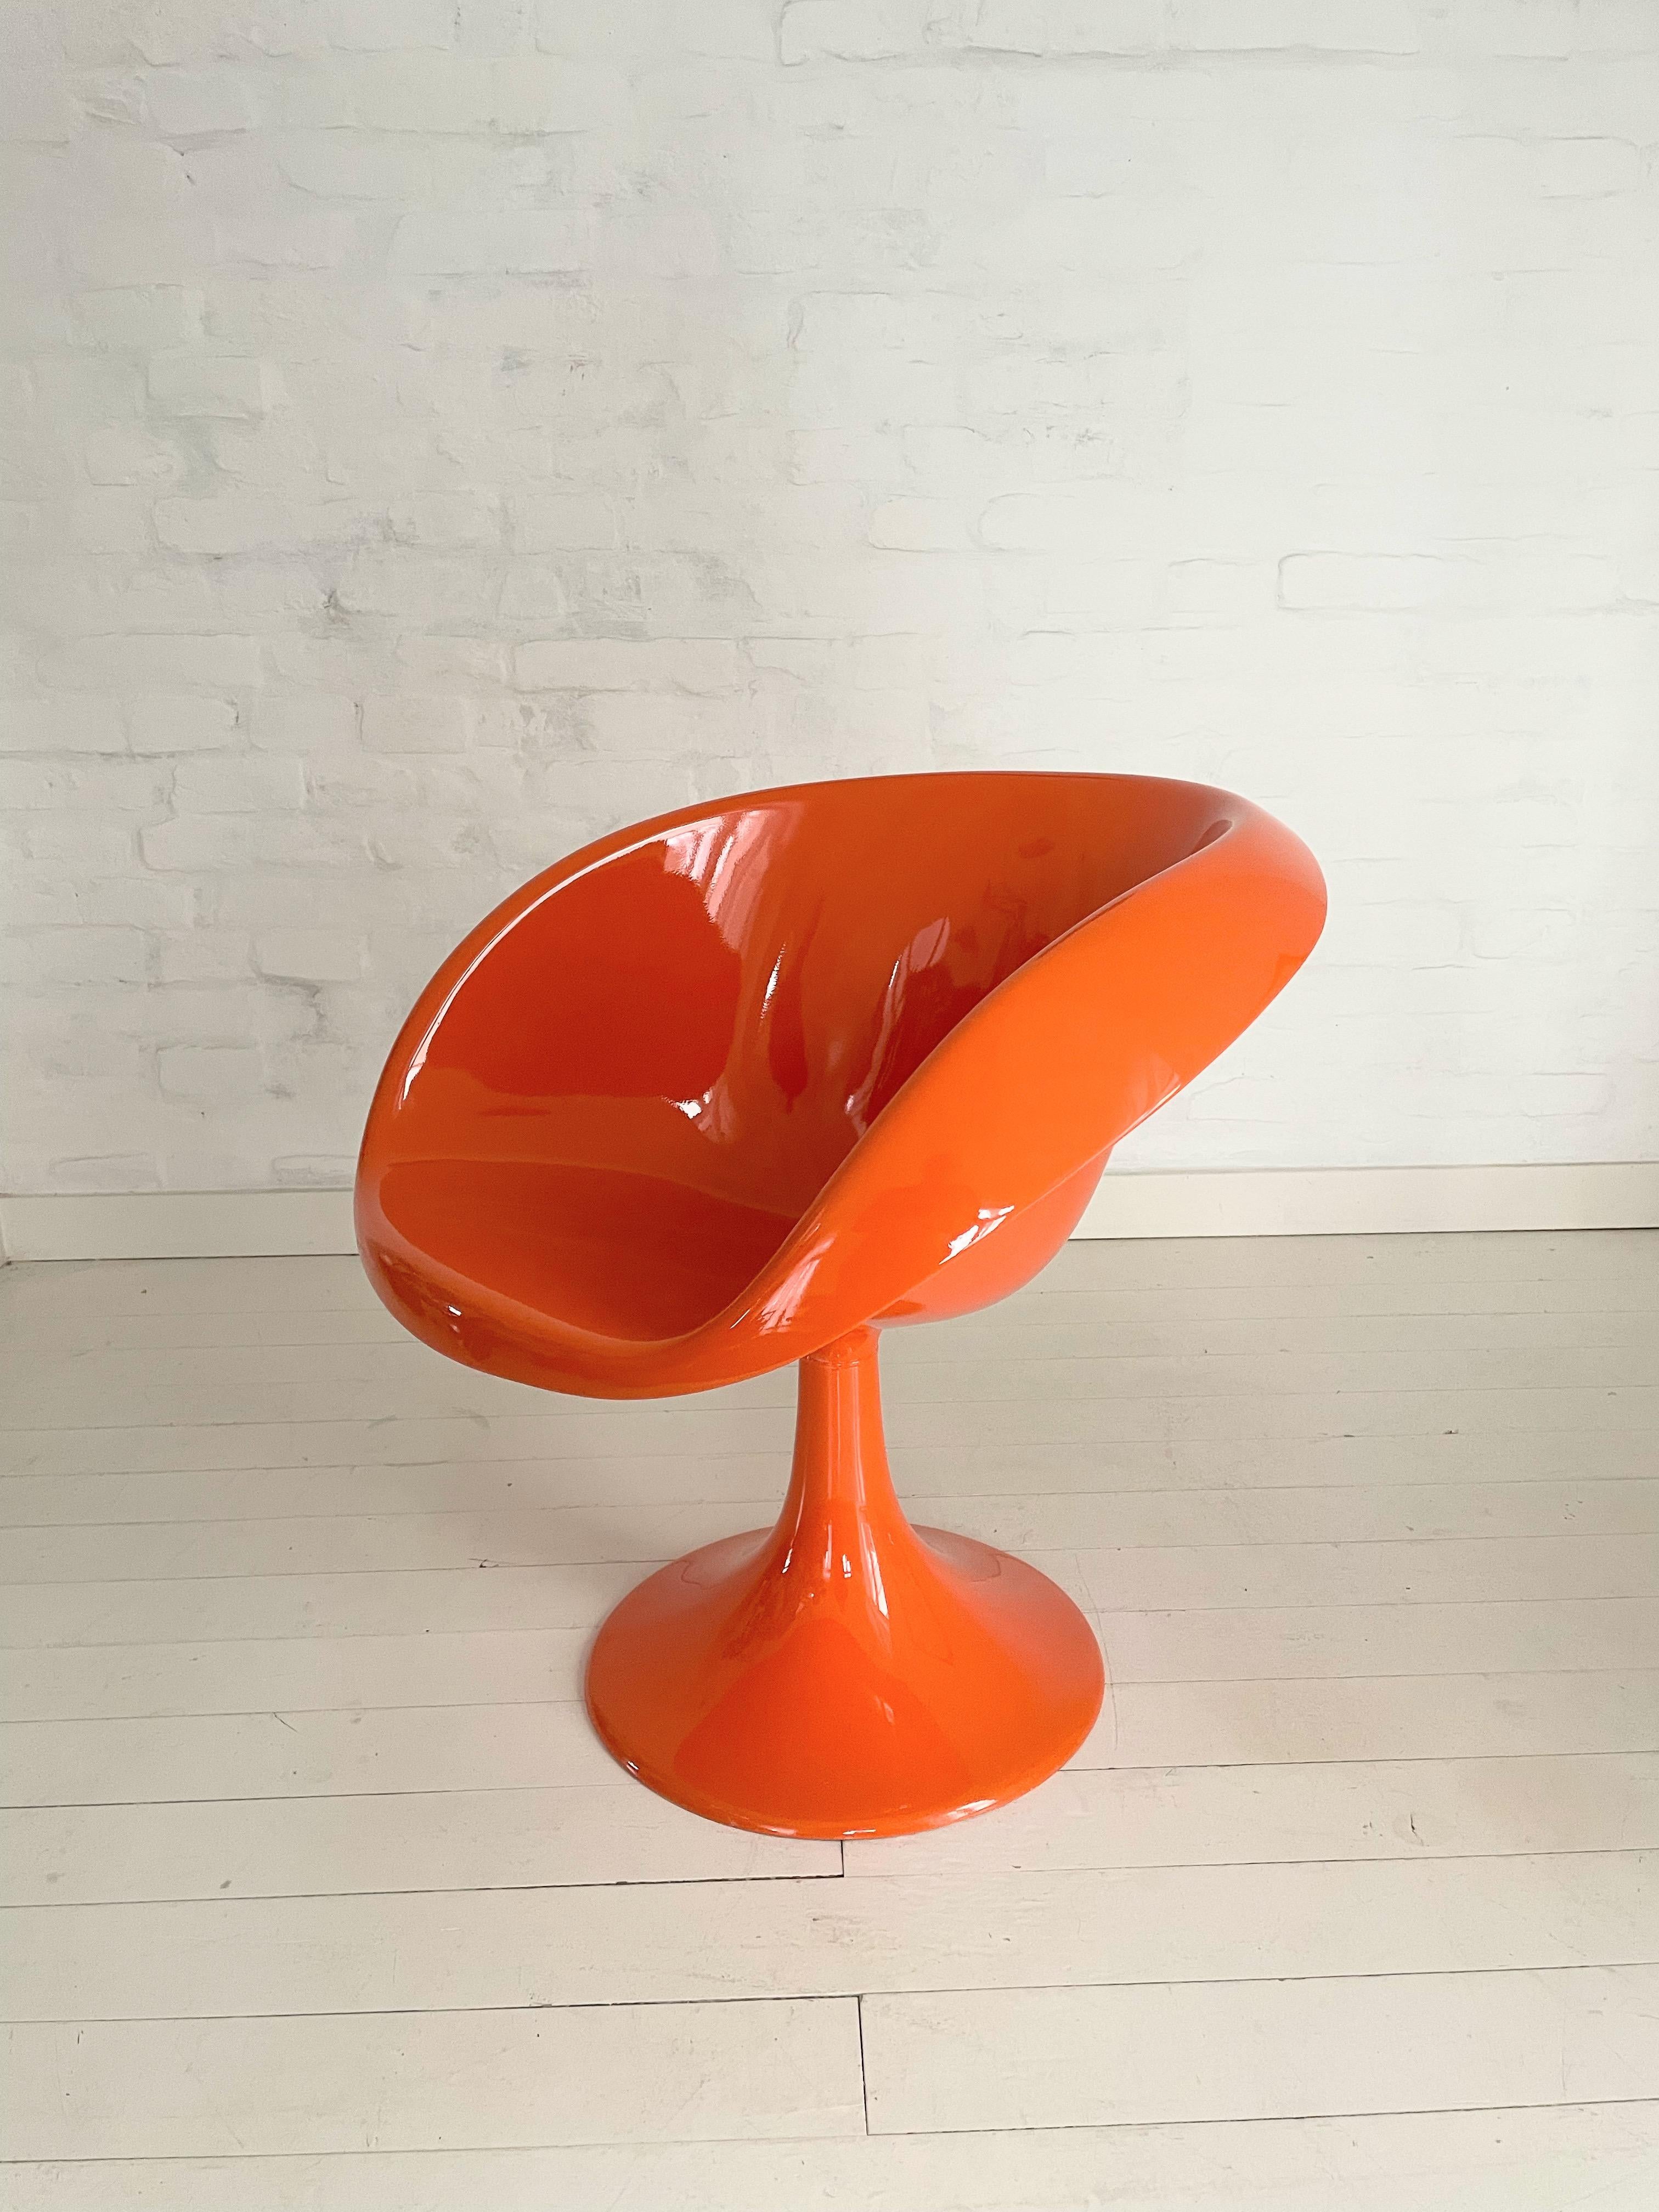 A stunning 1970s molded fiberglass comfortable armchair. In refurbished condition. This Orange-colored Space Age design furniture is made of fiberglass resin, . Made in limited quantities. .Extremely nice condition, even for a collection. The